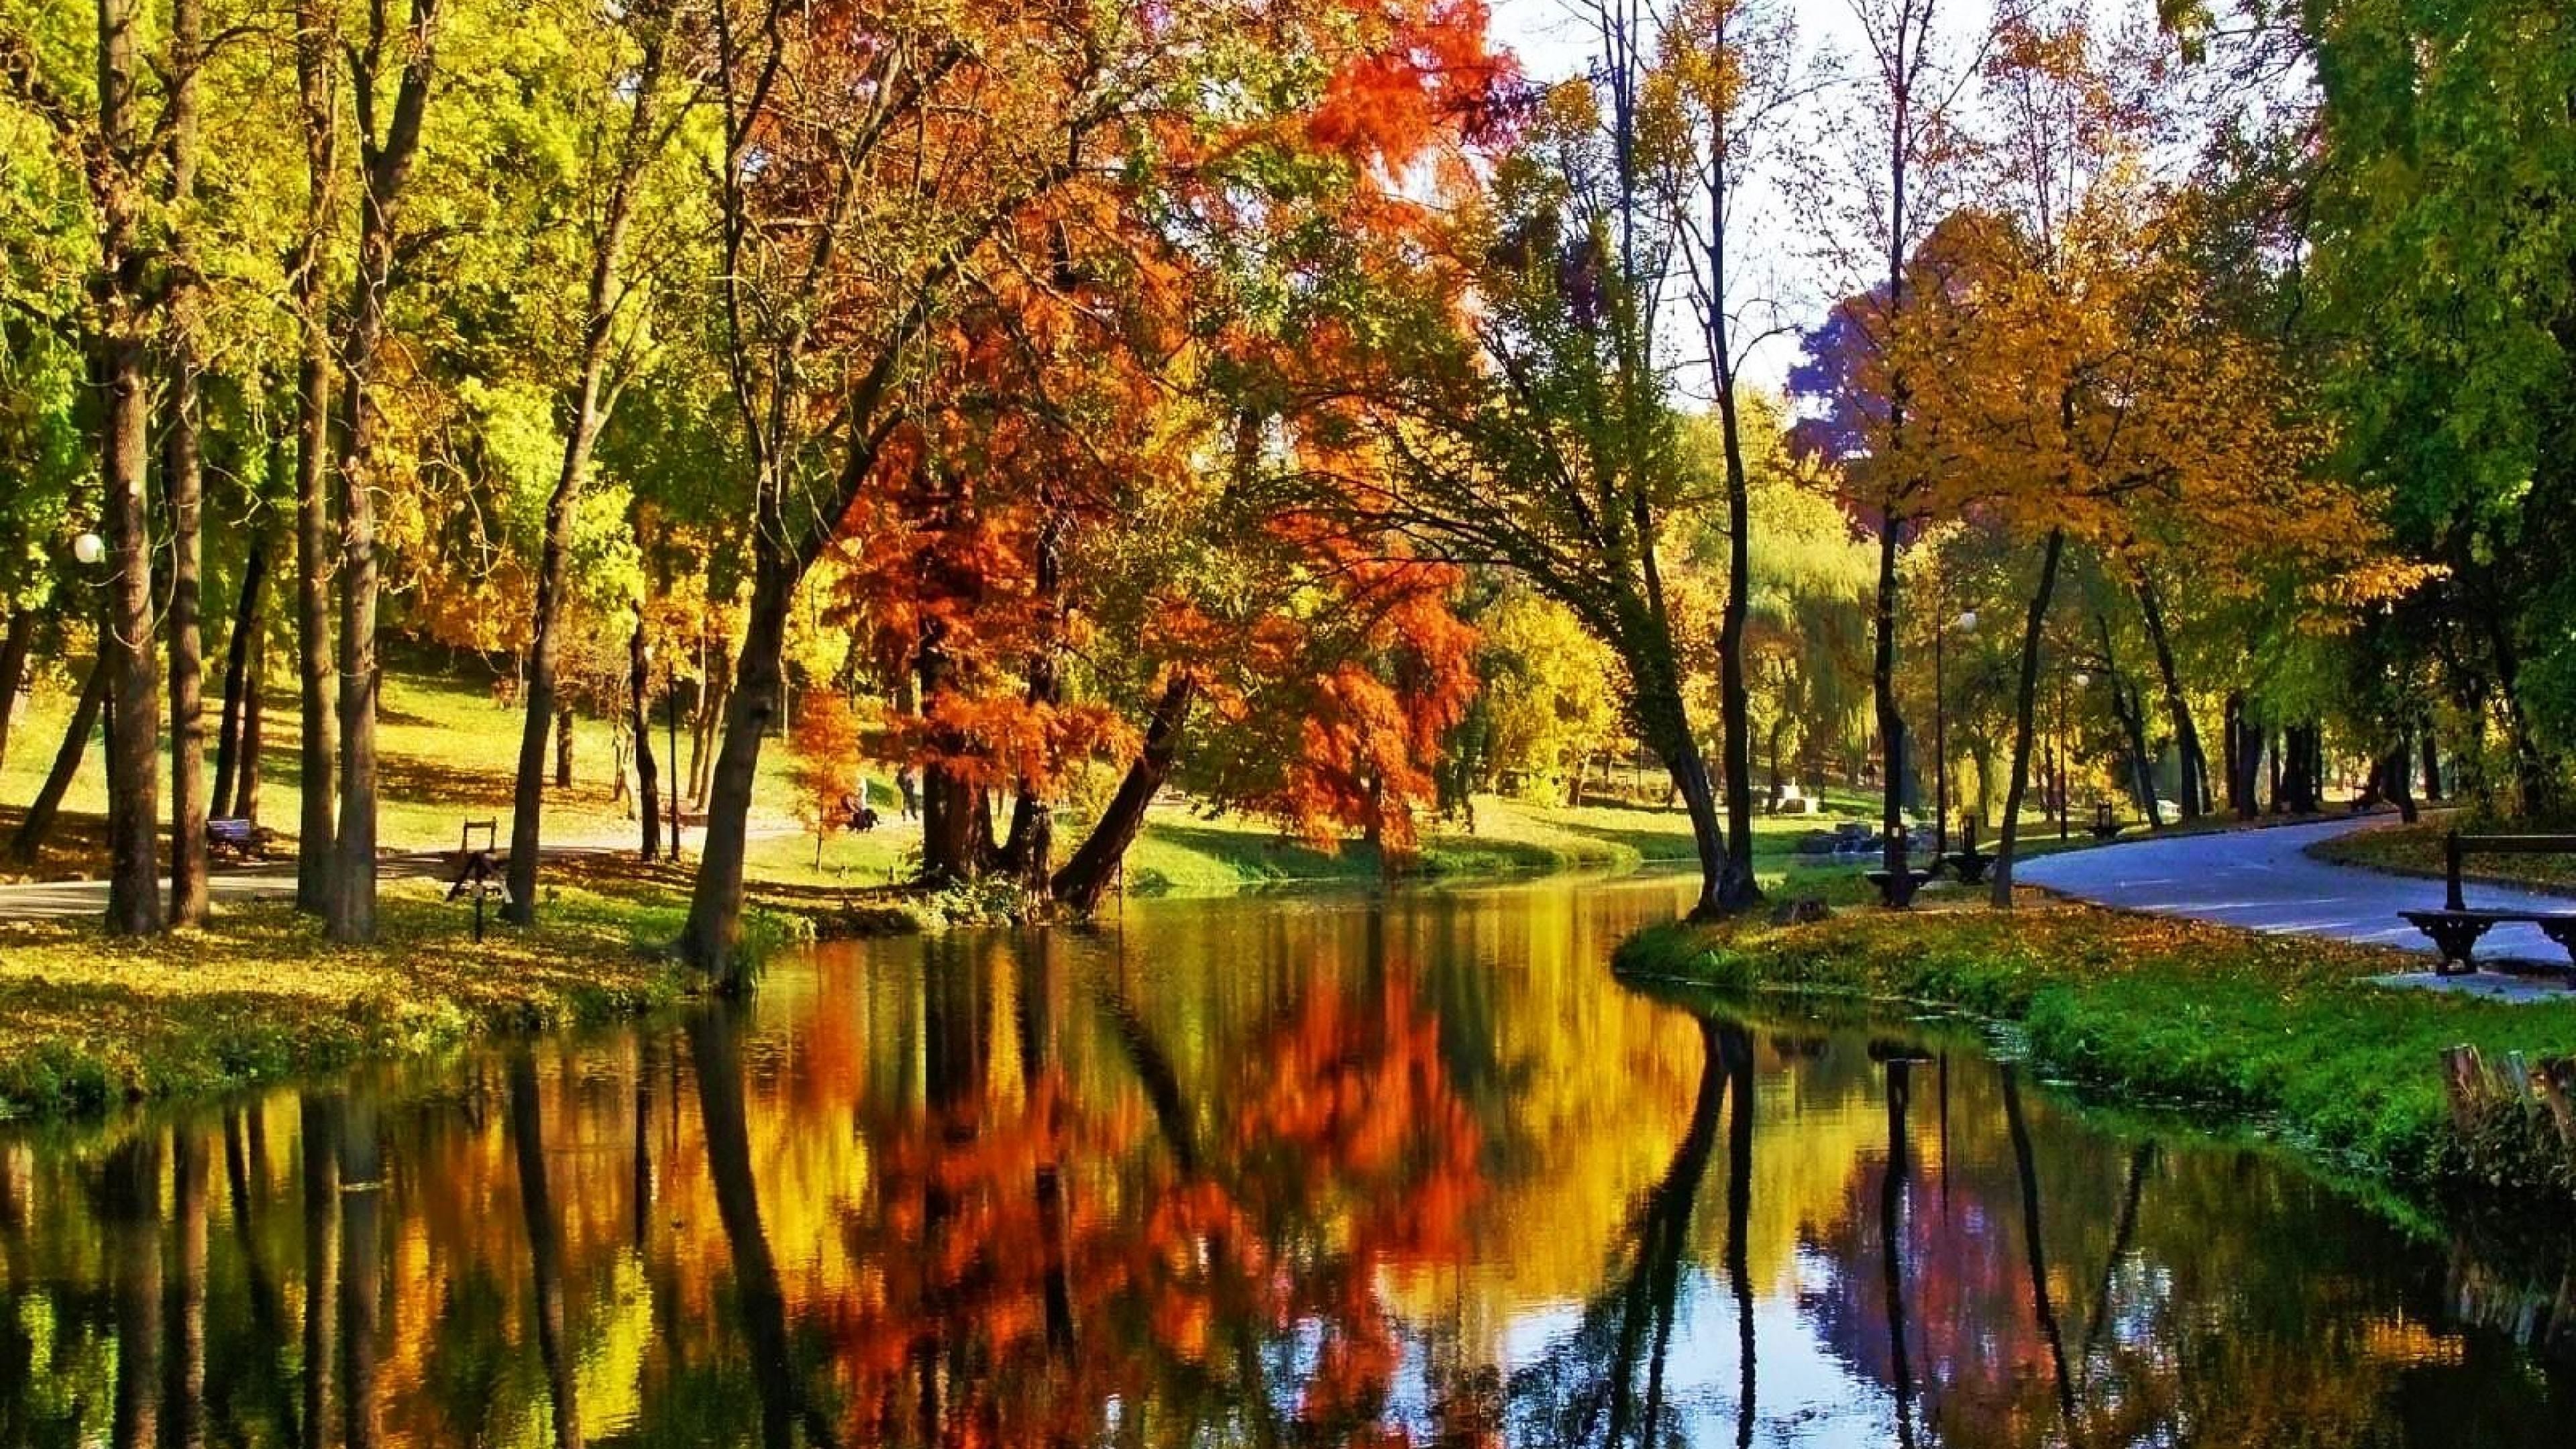 Autumn Trees Reflected in River - Image Abyss